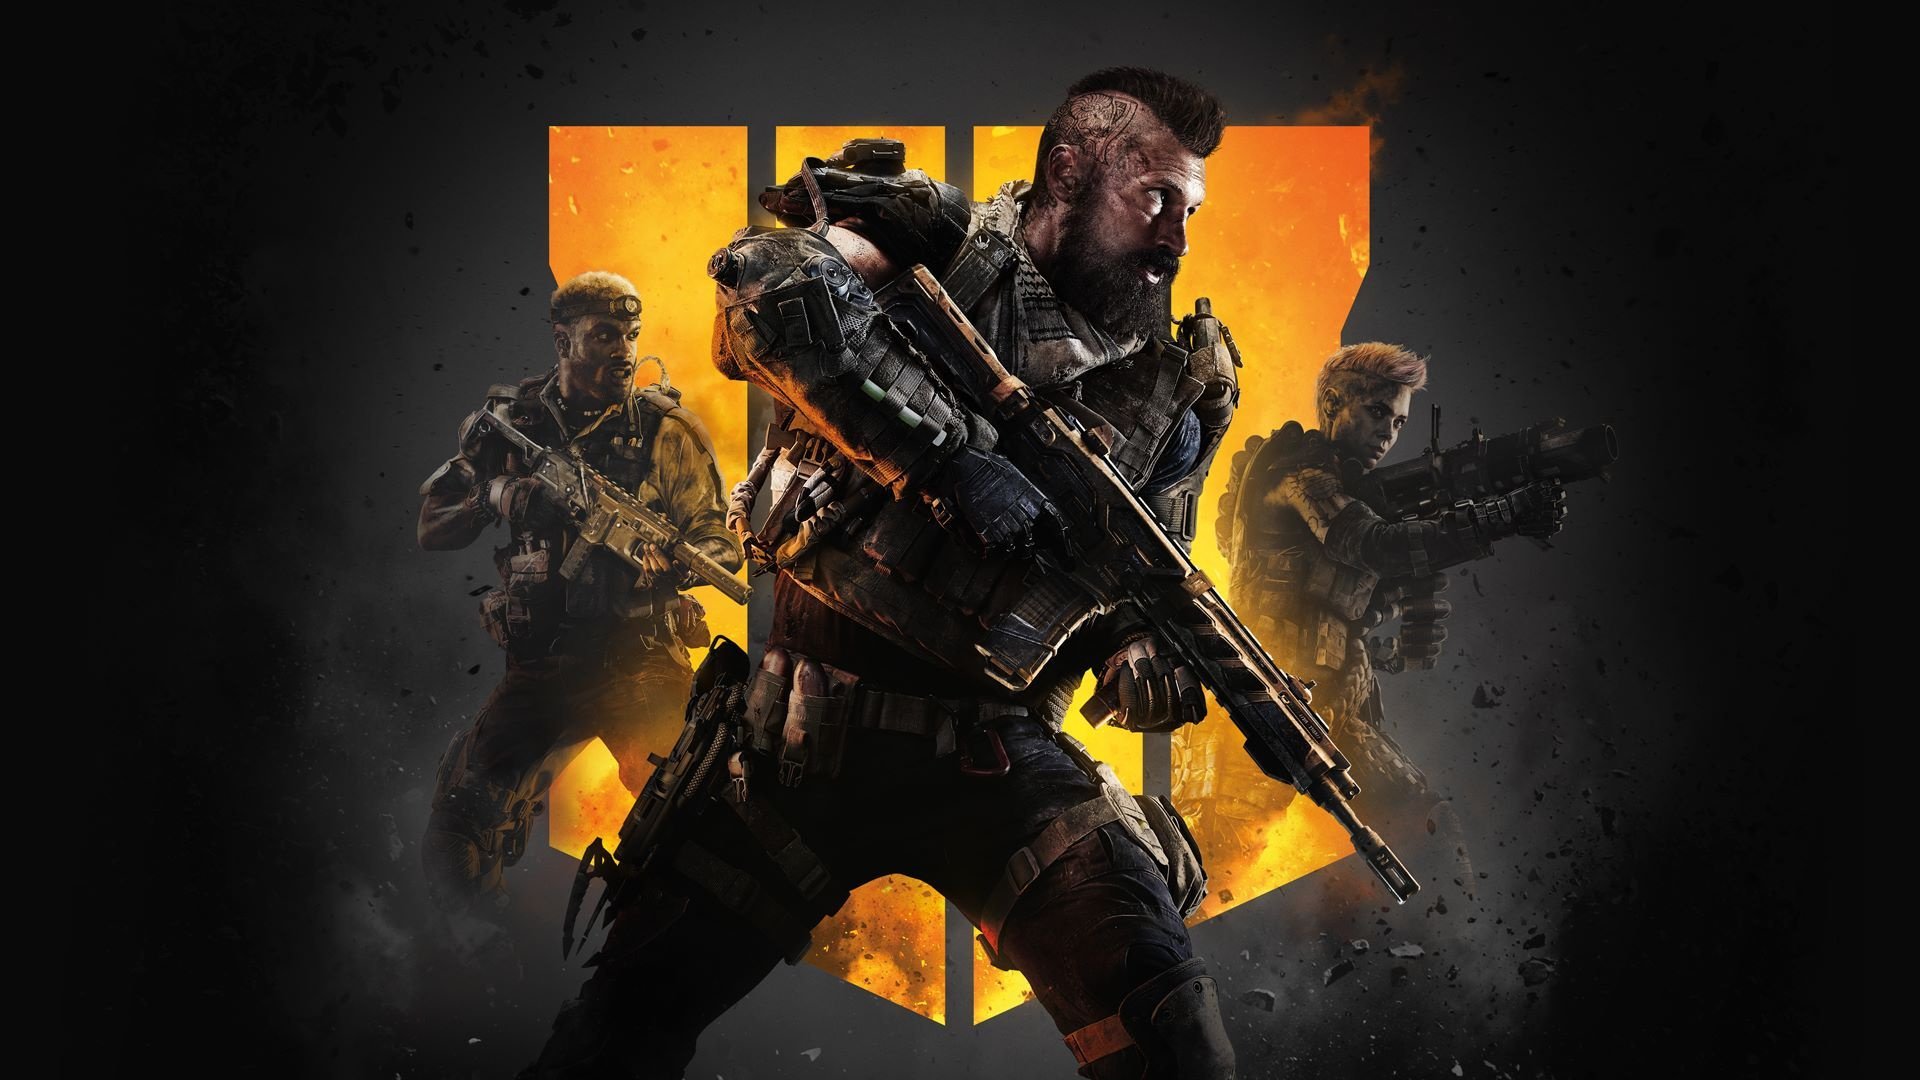 hands-on-call-of-duty-black-ops-4-s-multiplayer-changes-4-the-better-push-square